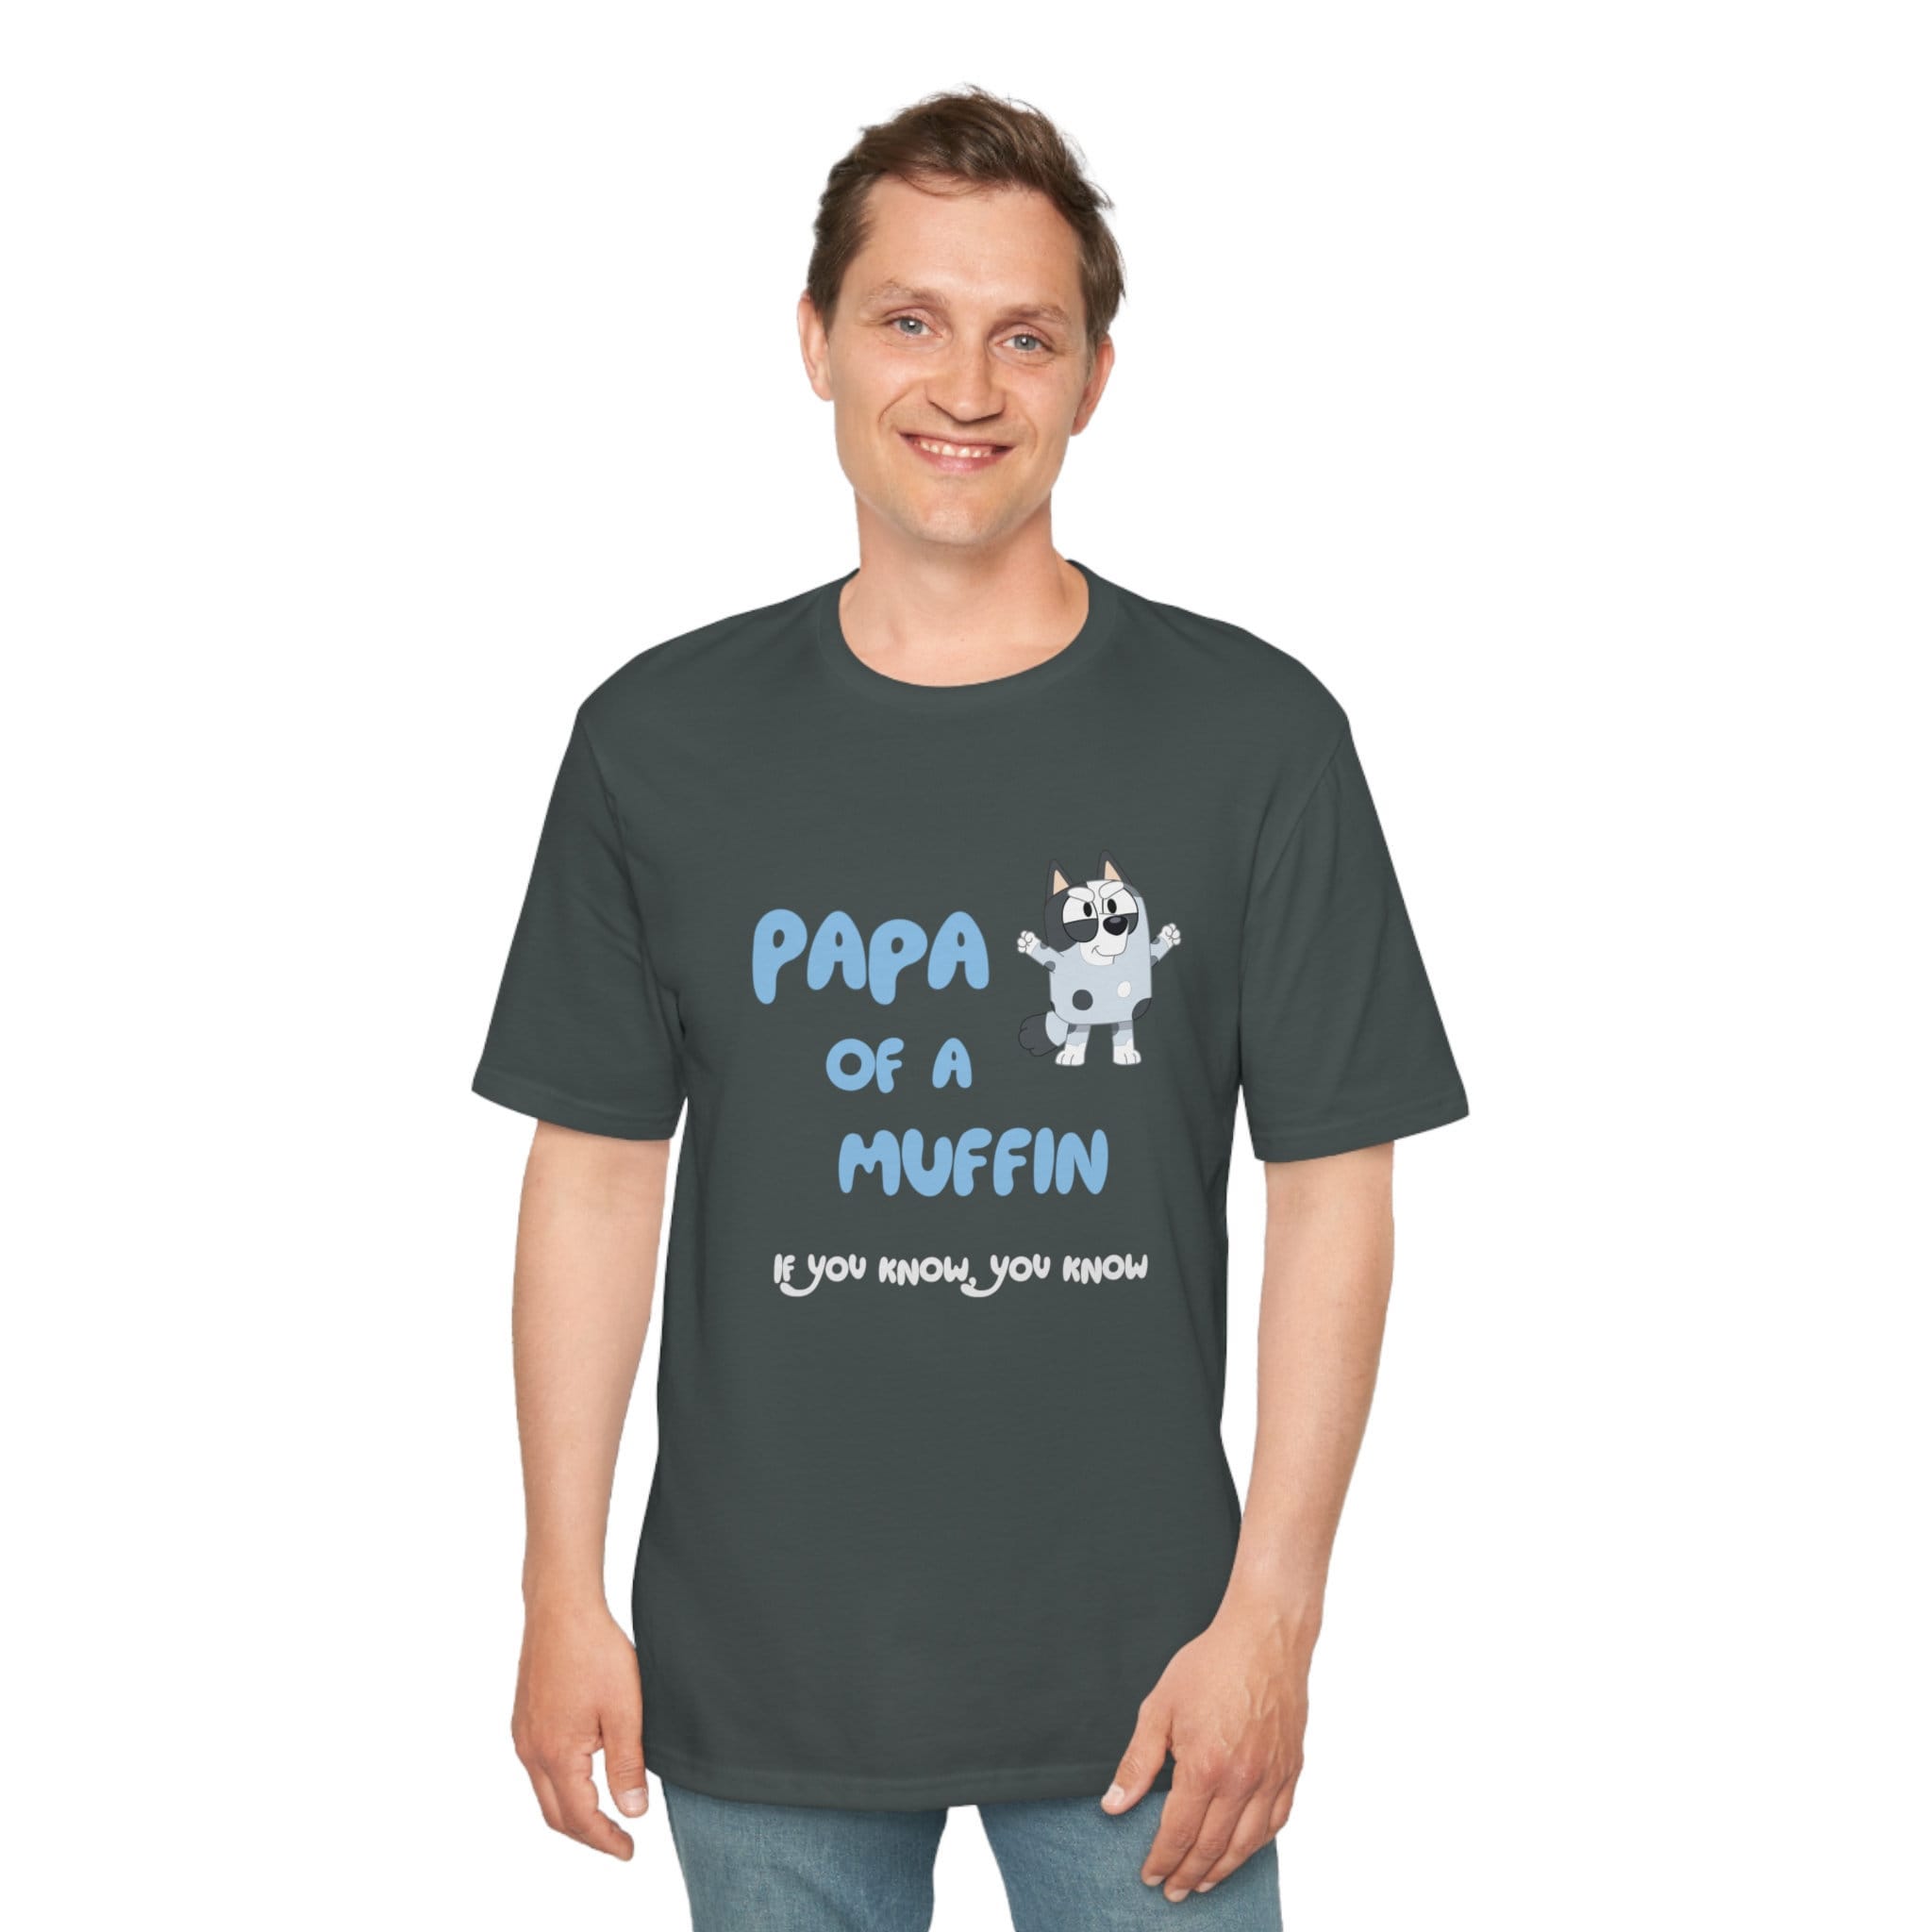 Bluey Muffin Tshirt for Papa (Dad/Grandpa) perfect for fathers day